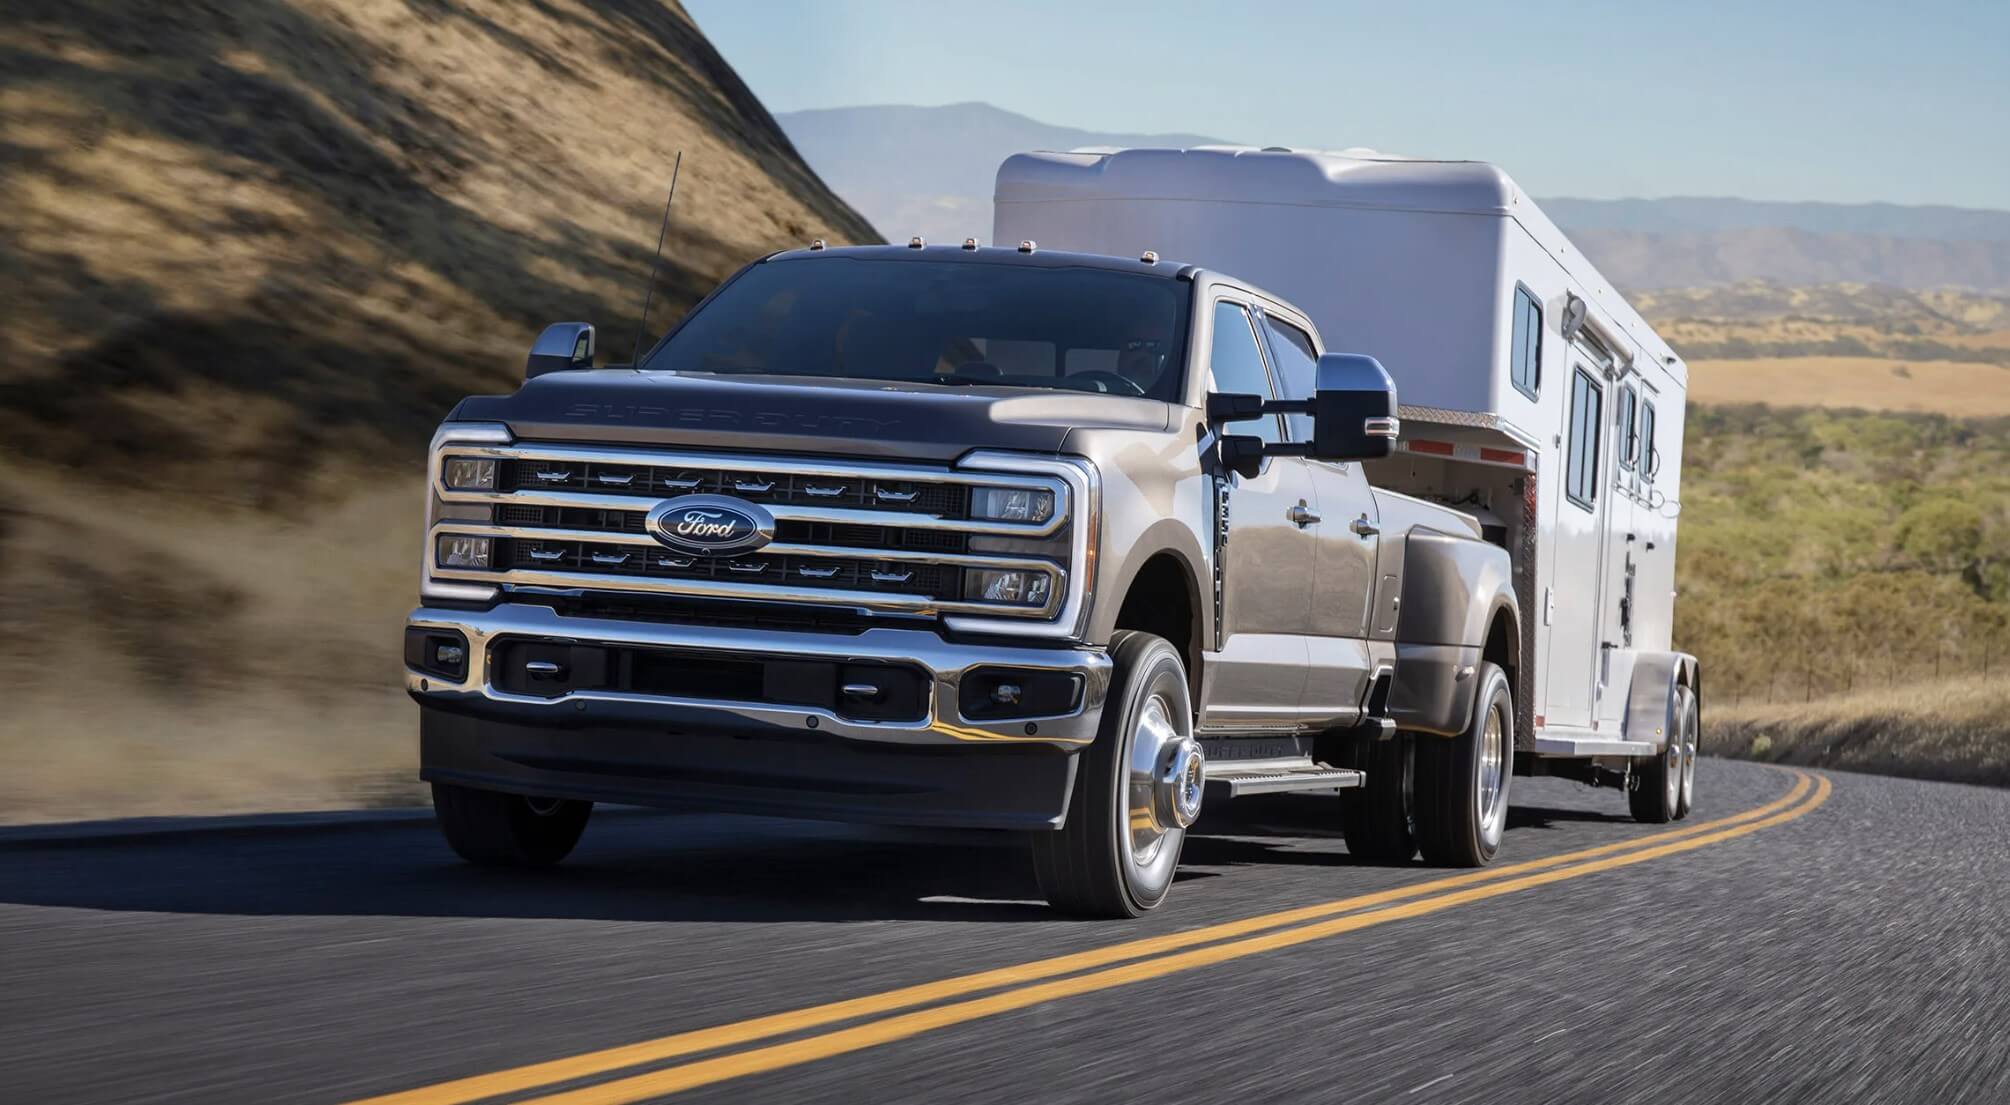 The Ford Super Duty truck towing a trailer